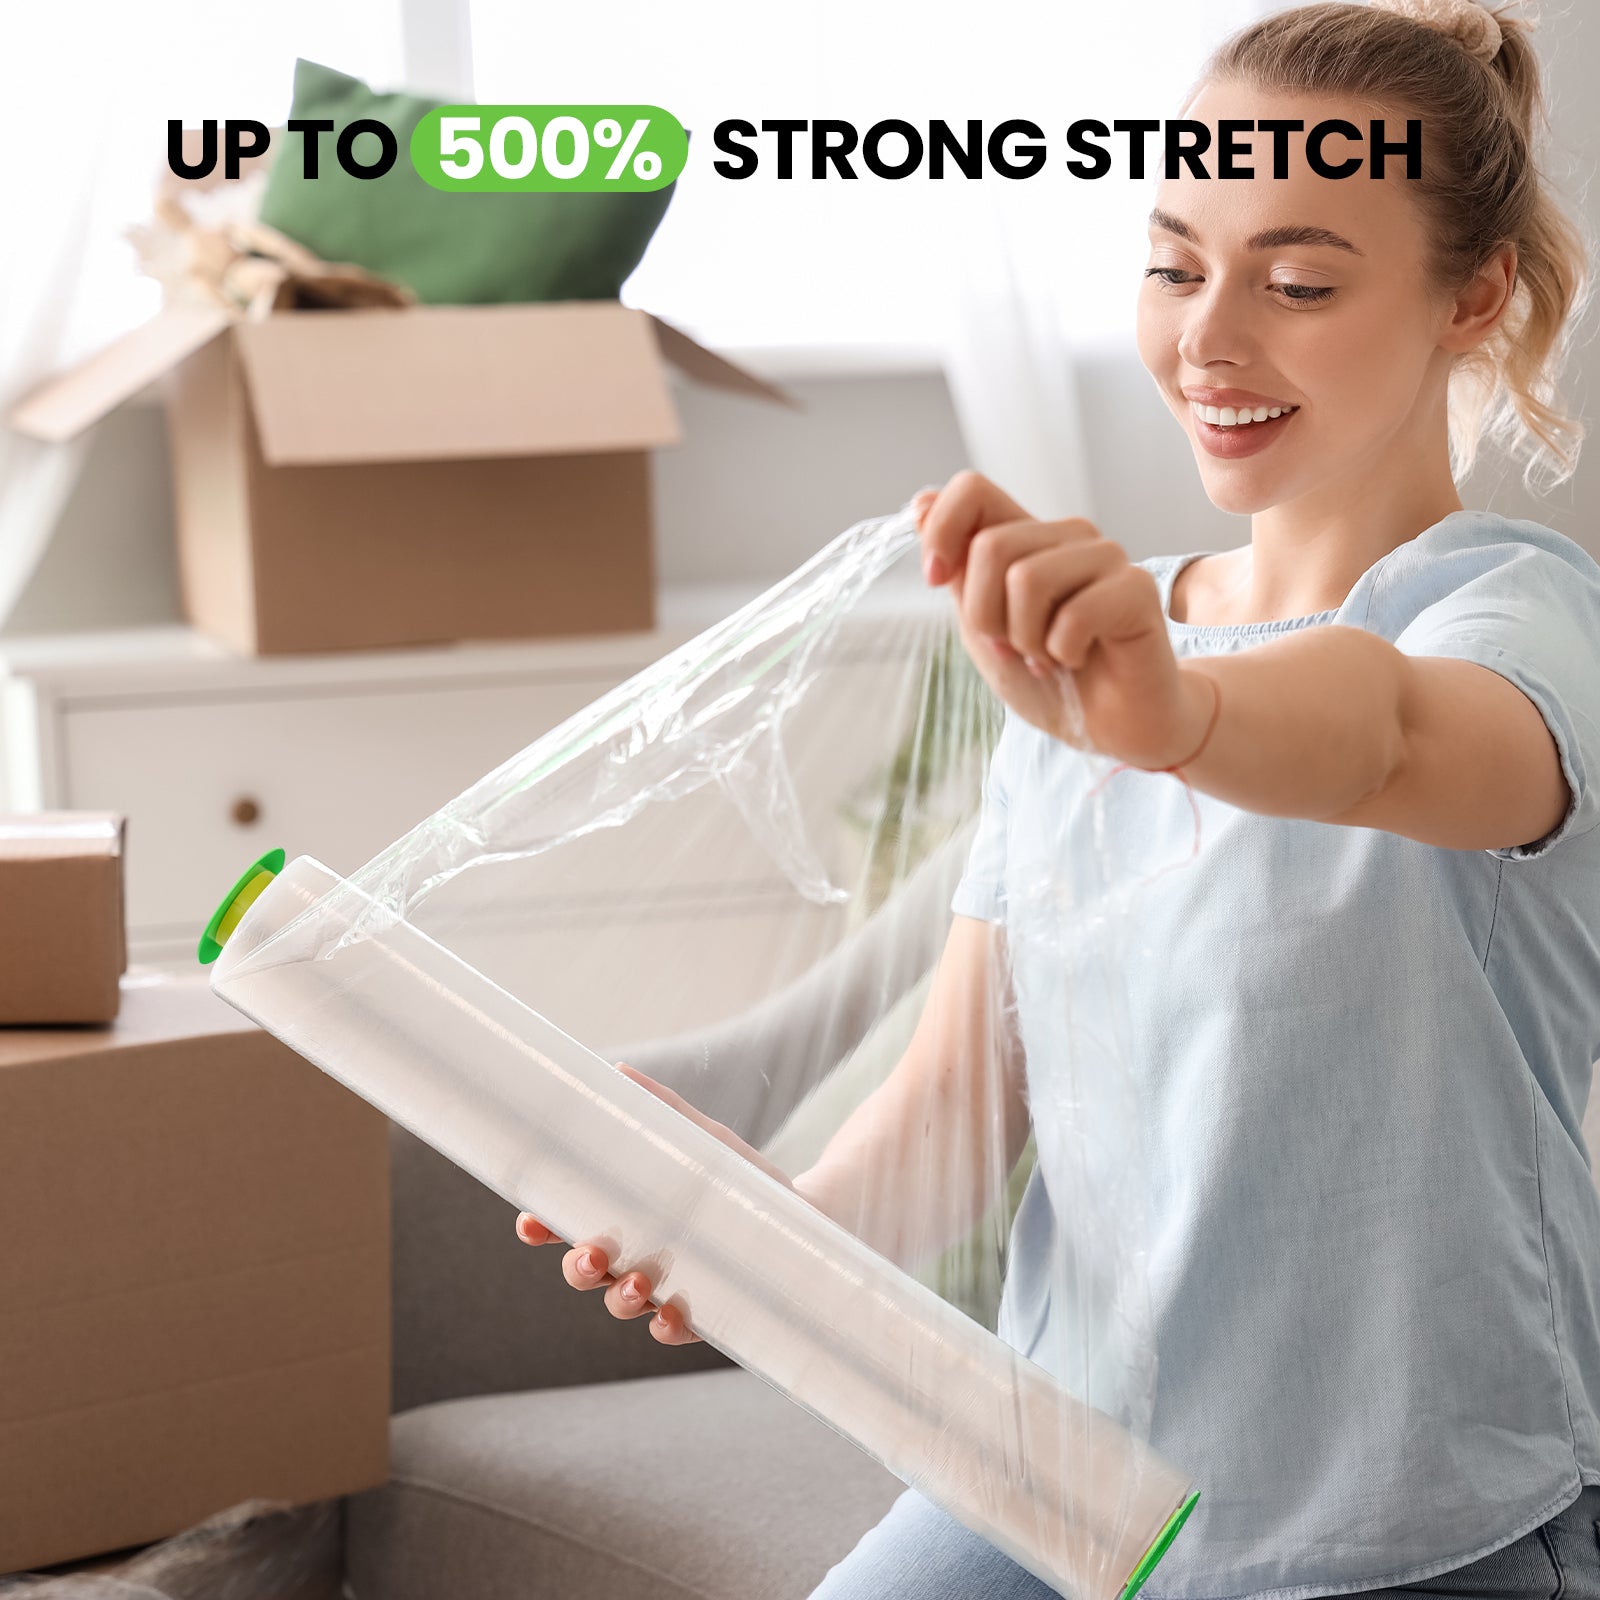 MUNBYN stretch film wrap boasts high tear and puncture resistance, allowing it to withstand tough handling and conditions.